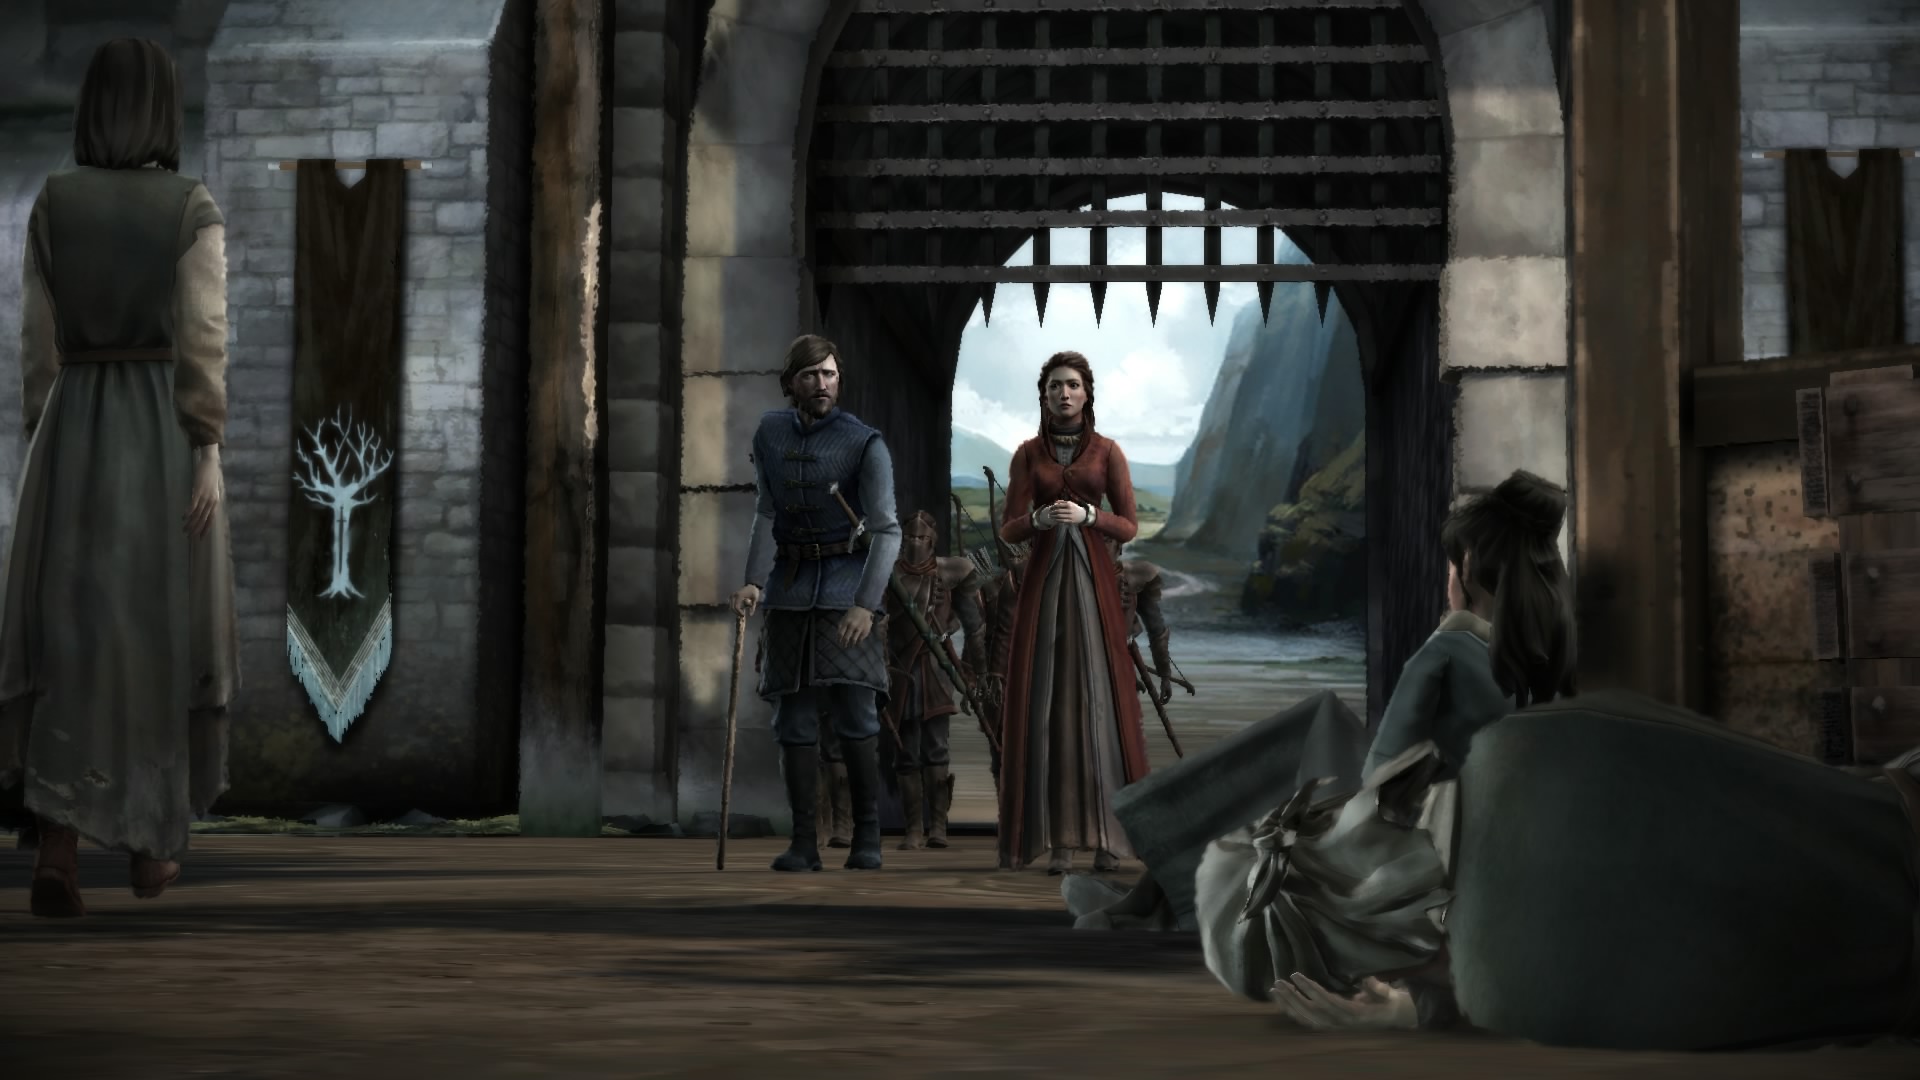 Game of Thrones: Episode 4 - Sons of Winter Review Gallery